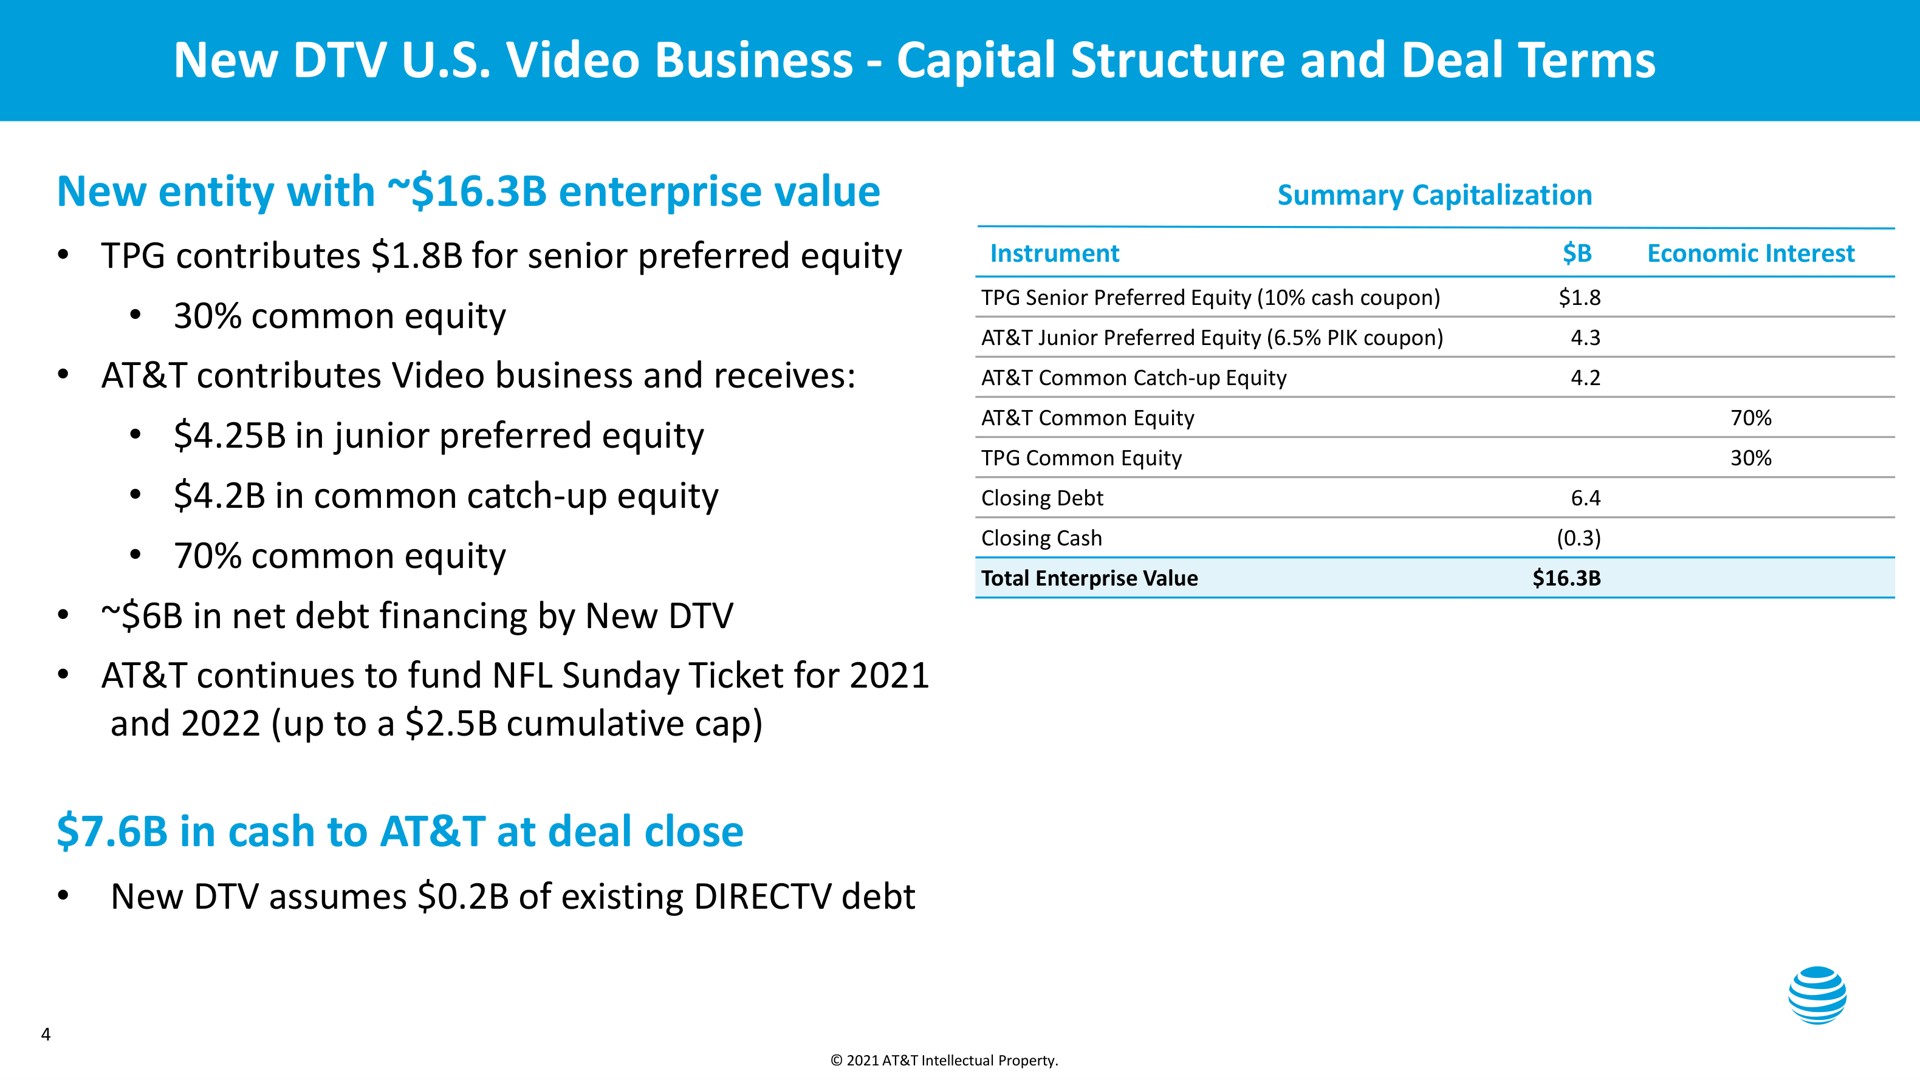 new video business capital structure and deal terms in cash to at at close | AT&T